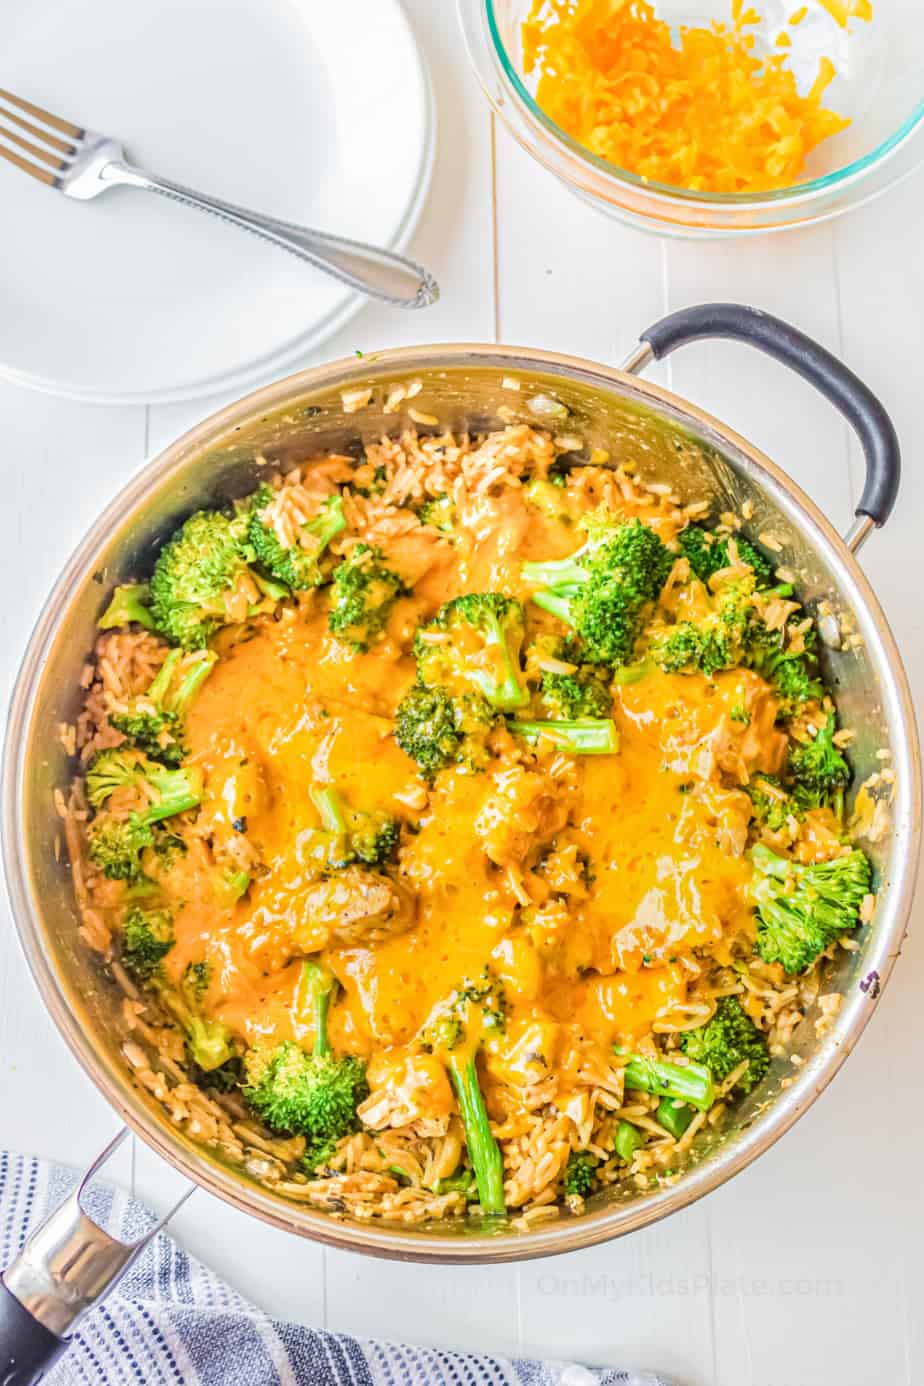 Melted cheese over broccoli, chicken and rice in a pan.